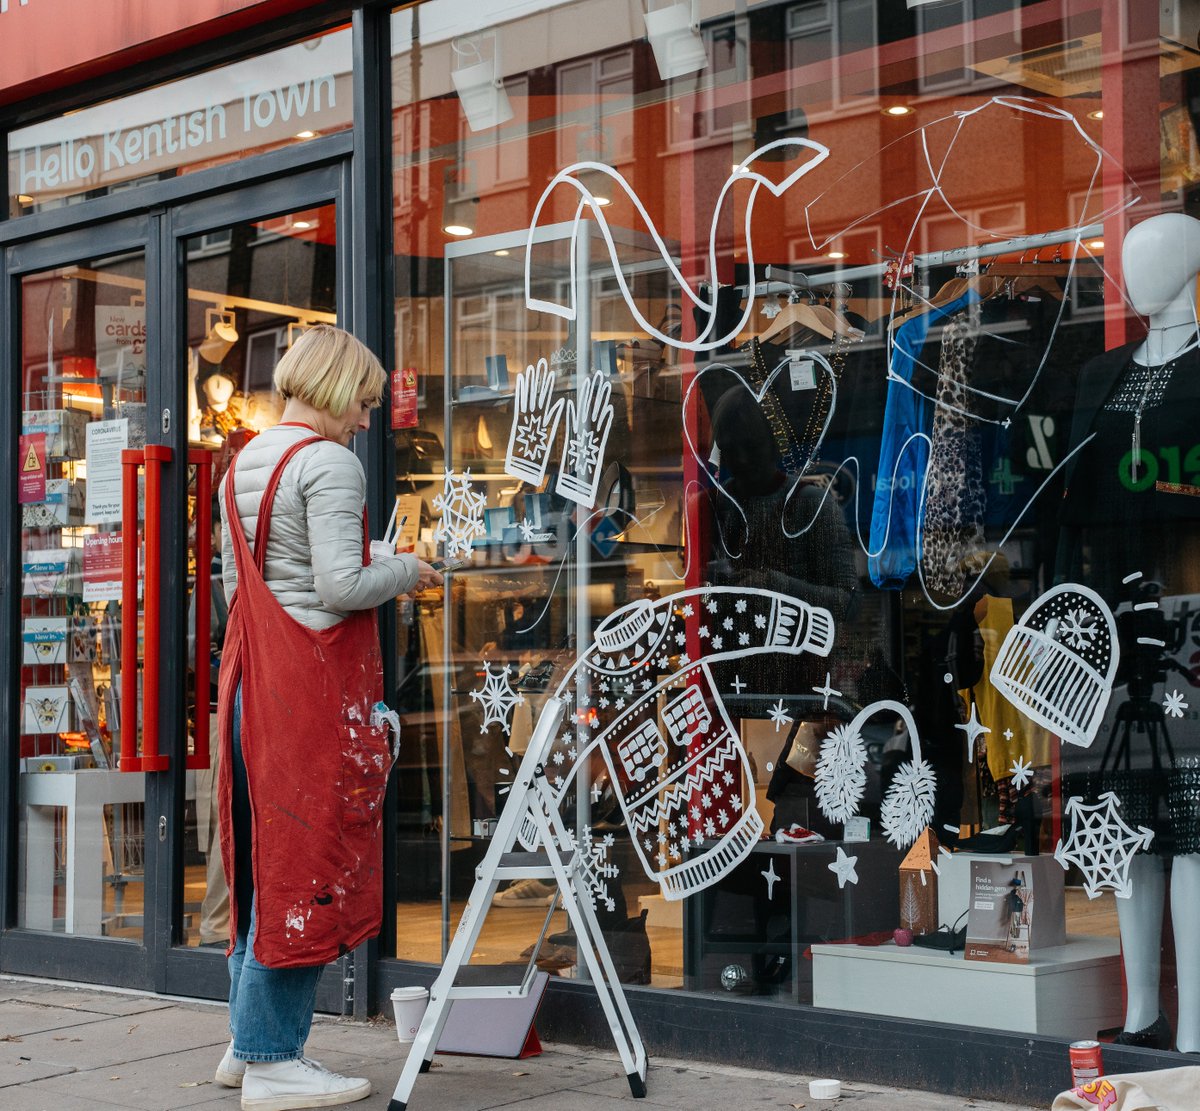 Local artist Willa Gebbie loves shopping preloved for herself and her child. Watch as she creates a beautiful window display in our Kentish Town shop, featuring cosy winter finds like Christmas jumpers awaiting a new lease of life. ☃️ Visit us in-store to experience the magic.